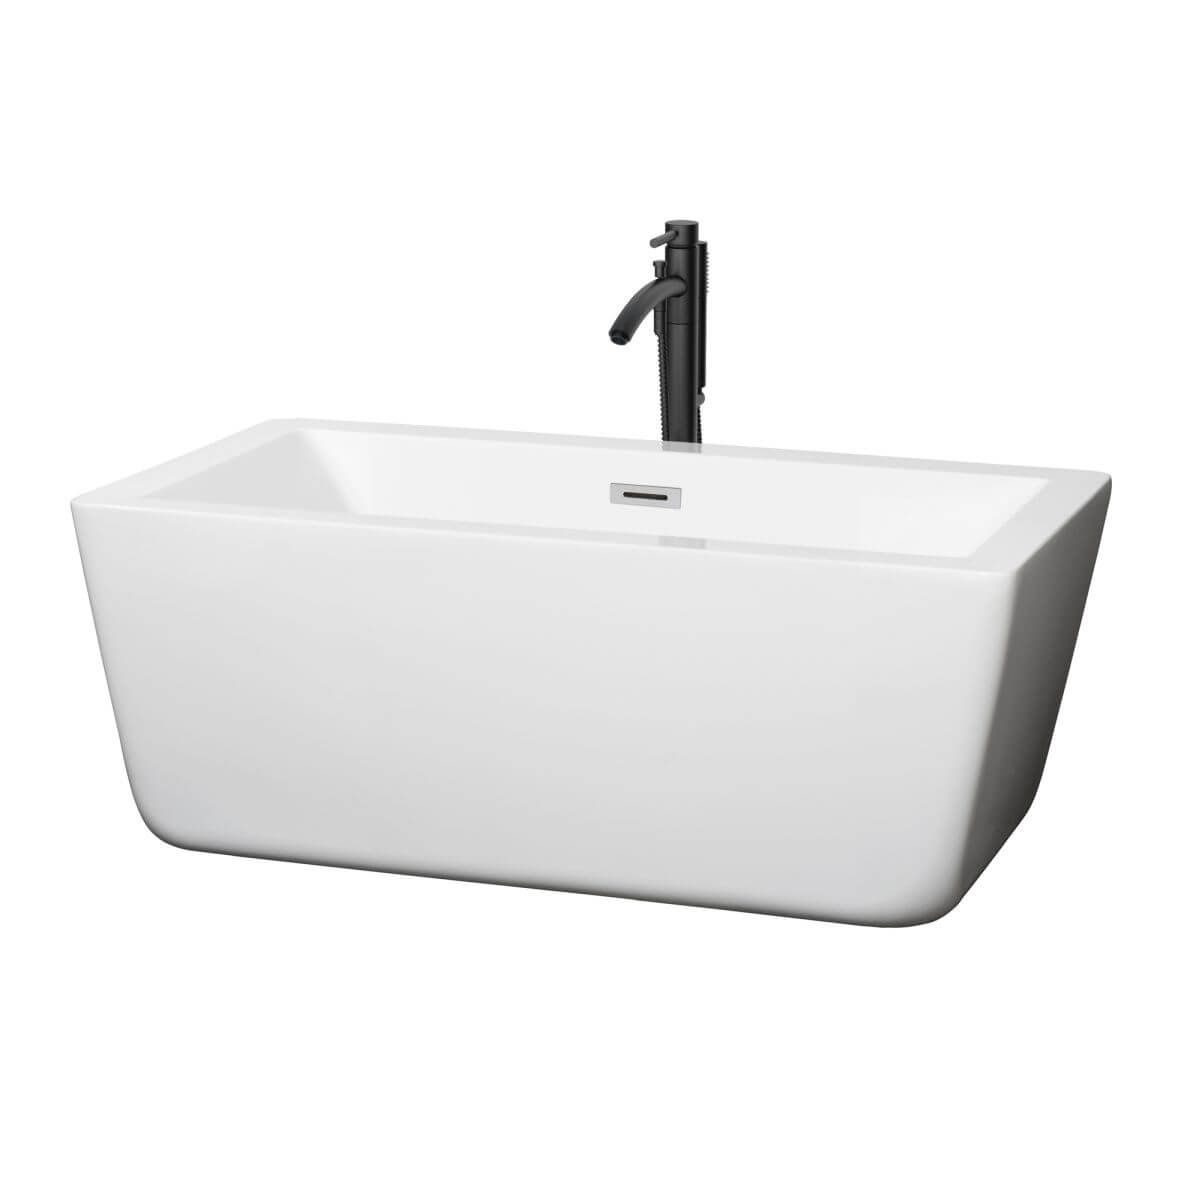 Wyndham Collection Laura 59 inch Freestanding Bathtub in White with Polished Chrome Trim and Floor Mounted Faucet in Matte Black - WCOBT100559PCATPBK